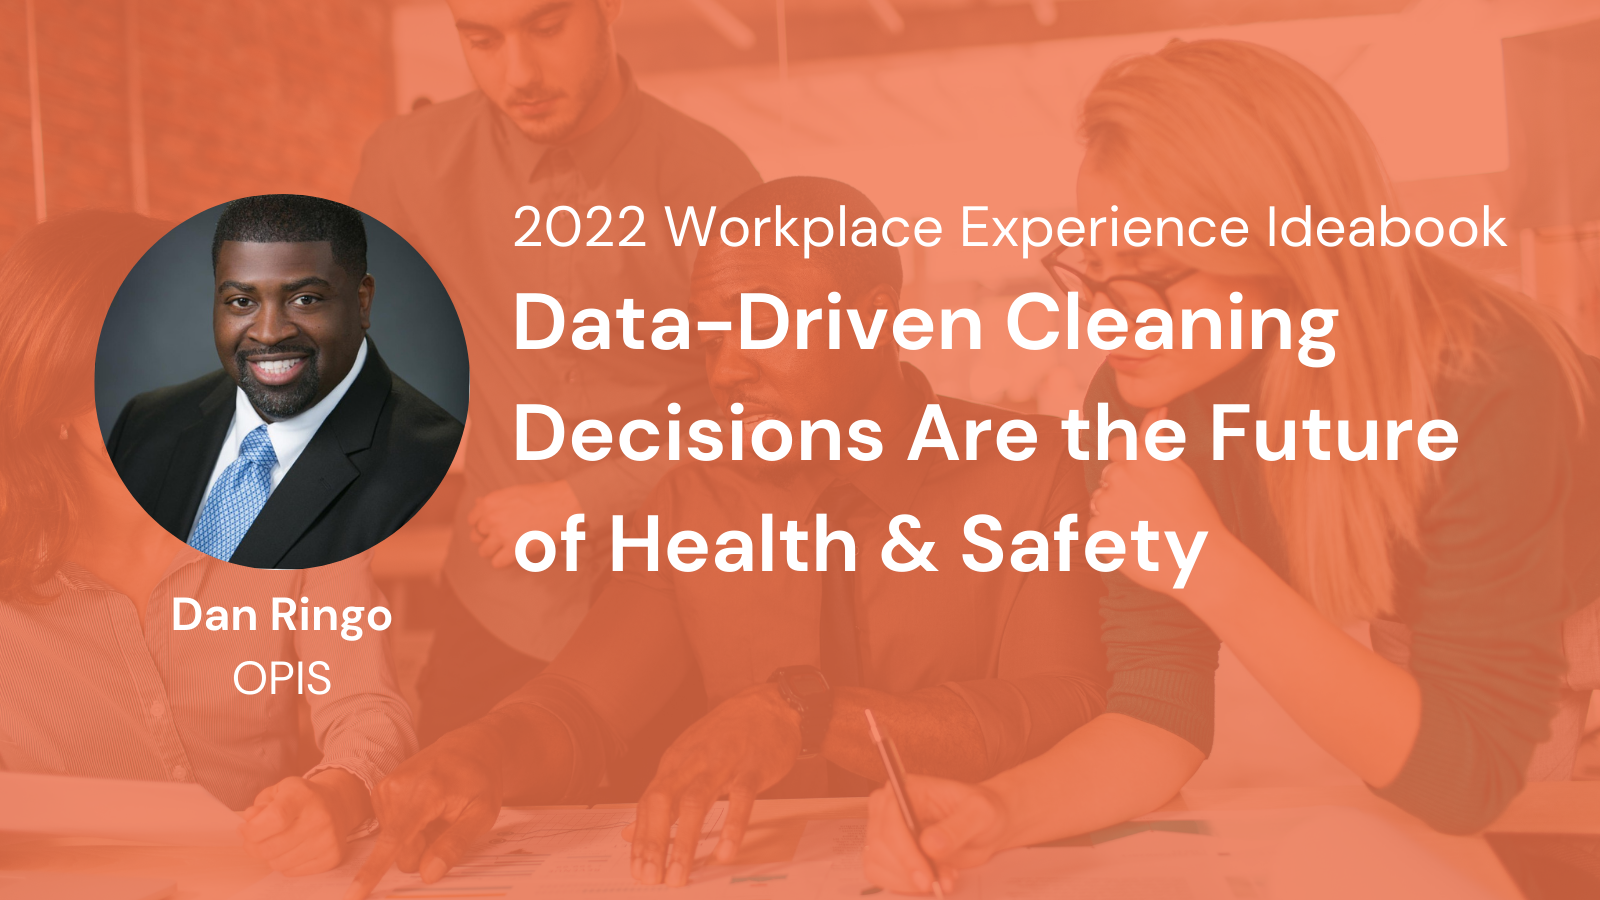 Data-driven Cleaning Decisions Are the Future of Health & Safety - Dan Ringo